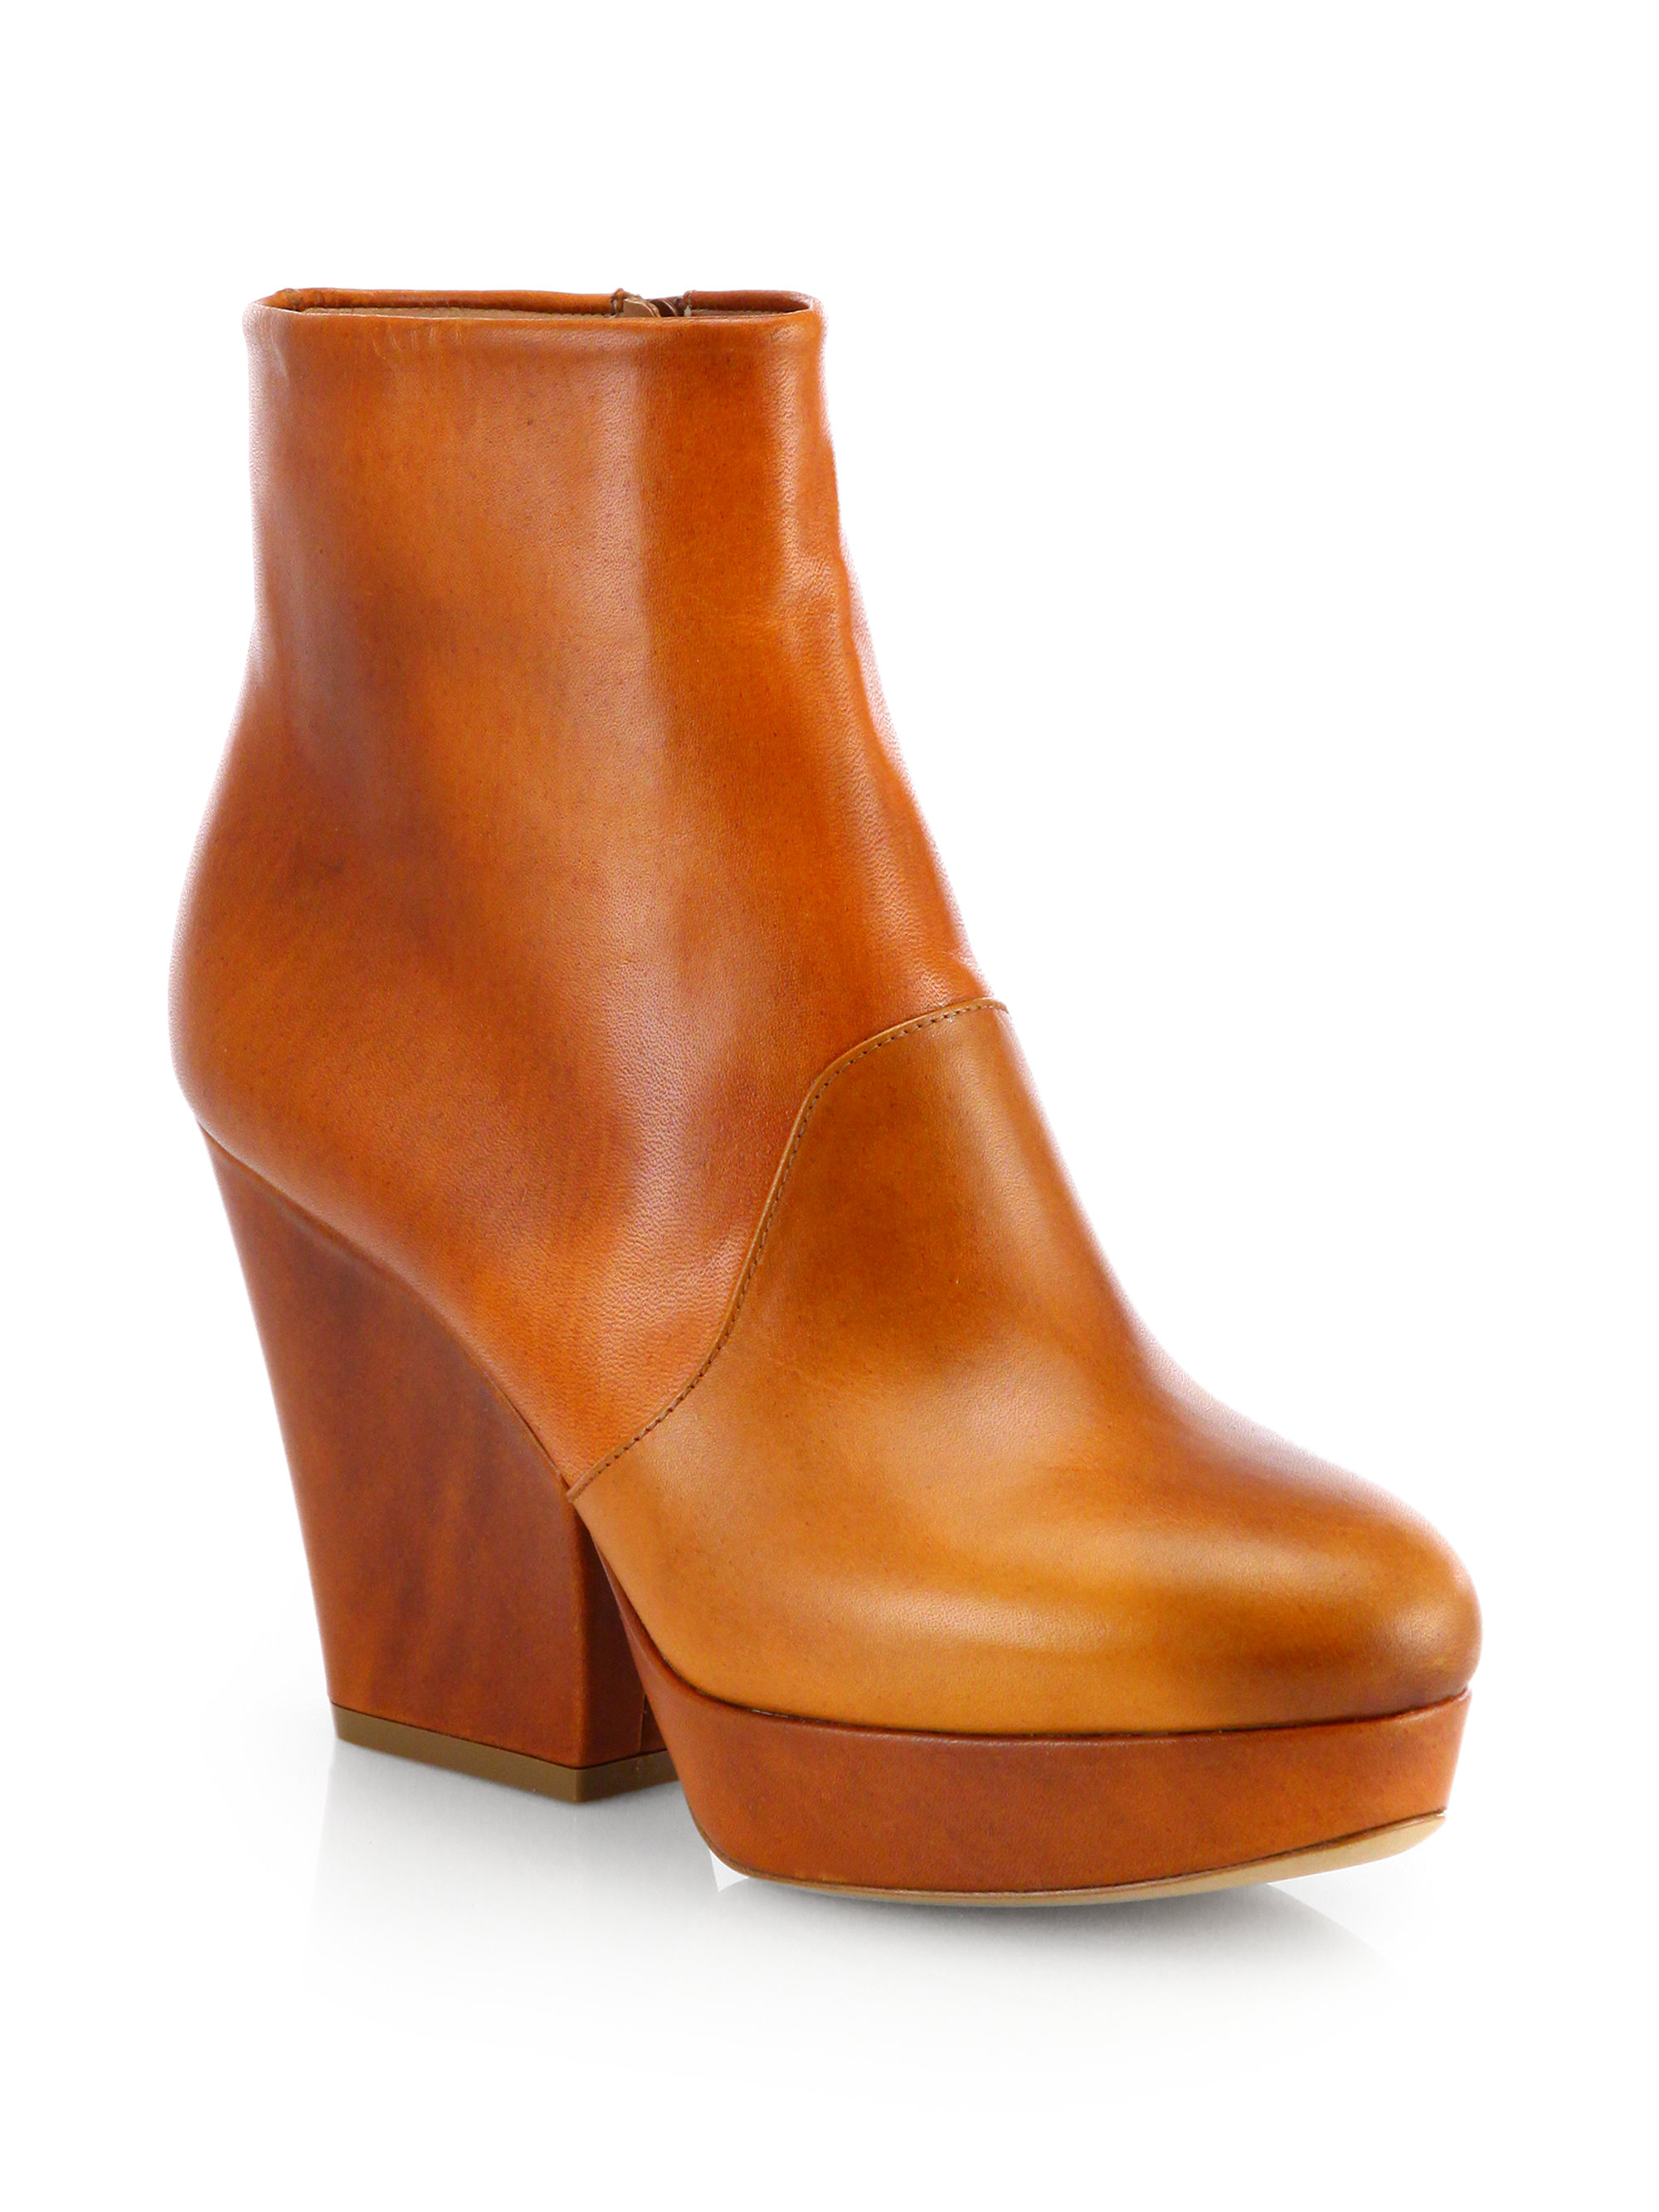 Maison Margiela Leather High-Heel Ankle Boots in Brown | Lyst